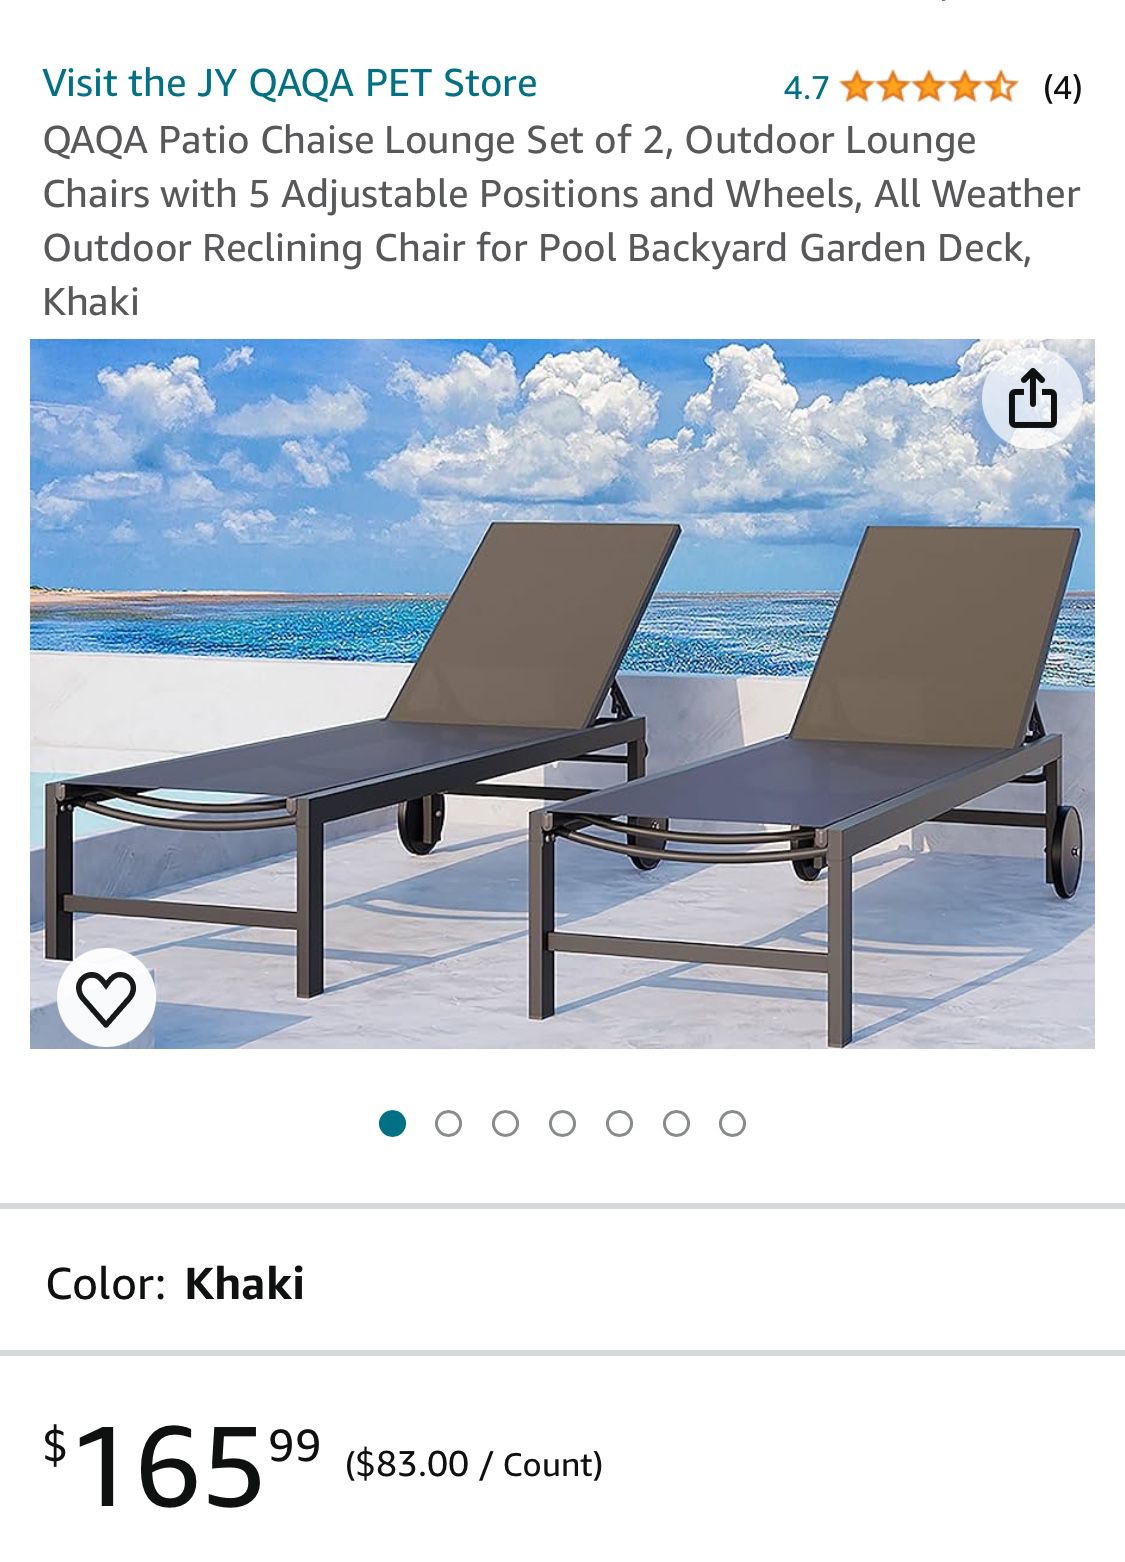 QAQA Patio Chaise Lounge Set of 2, Outdoor Lounge Chairs with 5 Adjustable Positions and Wheels, All Weather Outdoor Reclining Chair for Pool Backyard